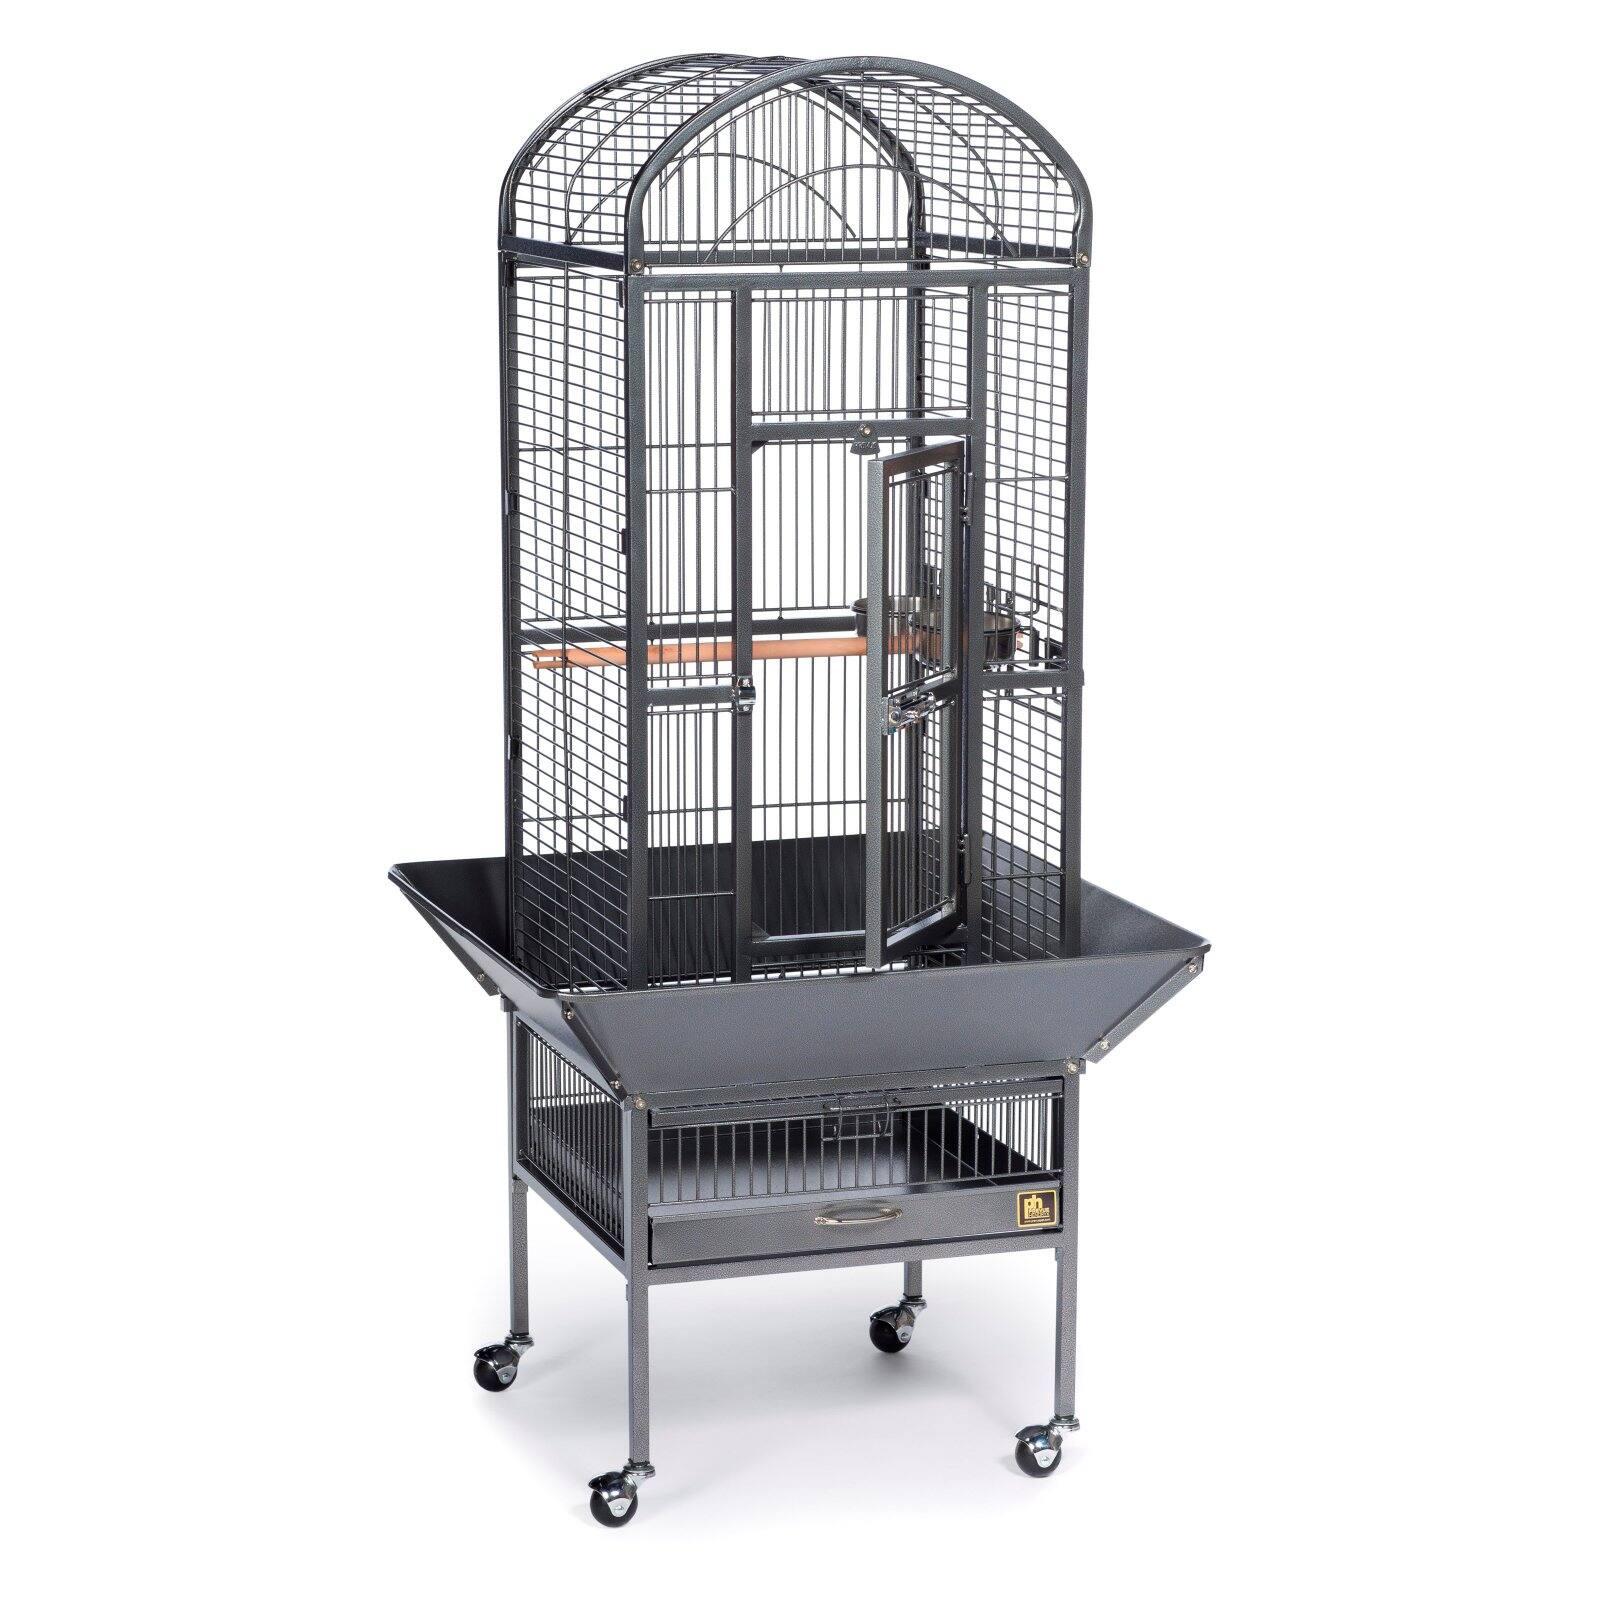 Prevue Pet Products Small Dometop Bird Cage Black Hammertone 34511 - image 2 of 11